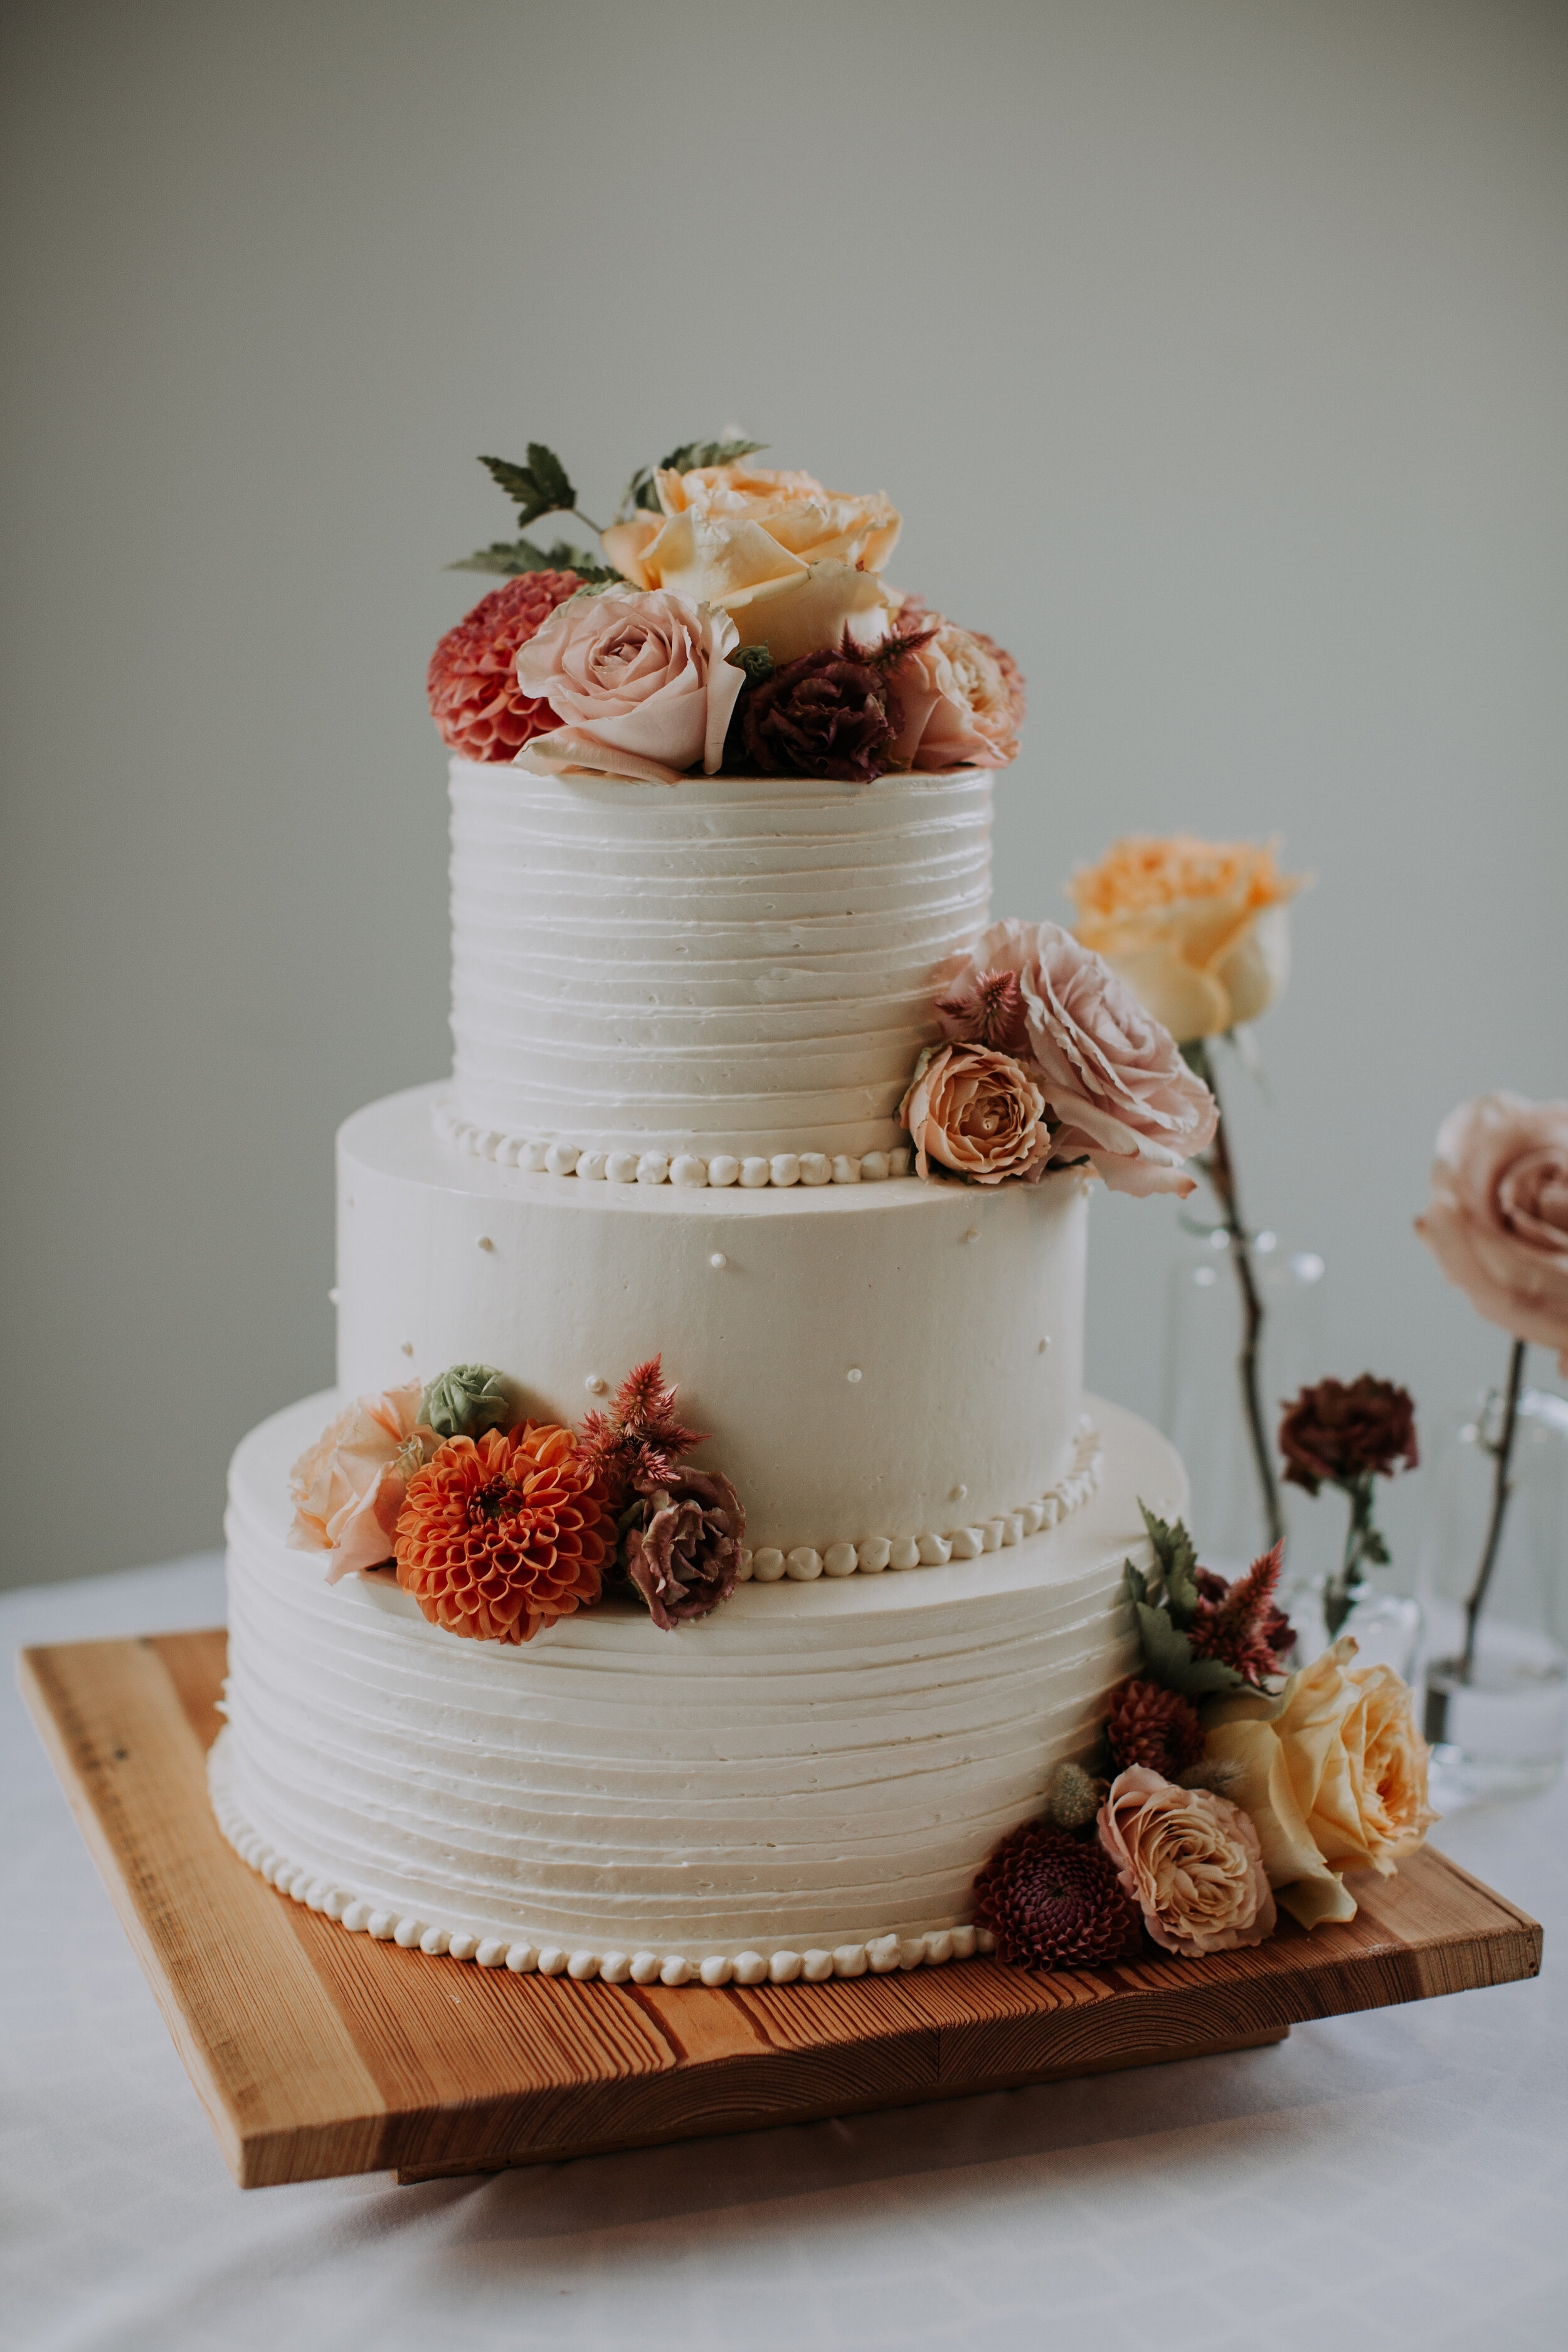 5 Beautiful Ways to Decorate Wedding Cakes with Flowers